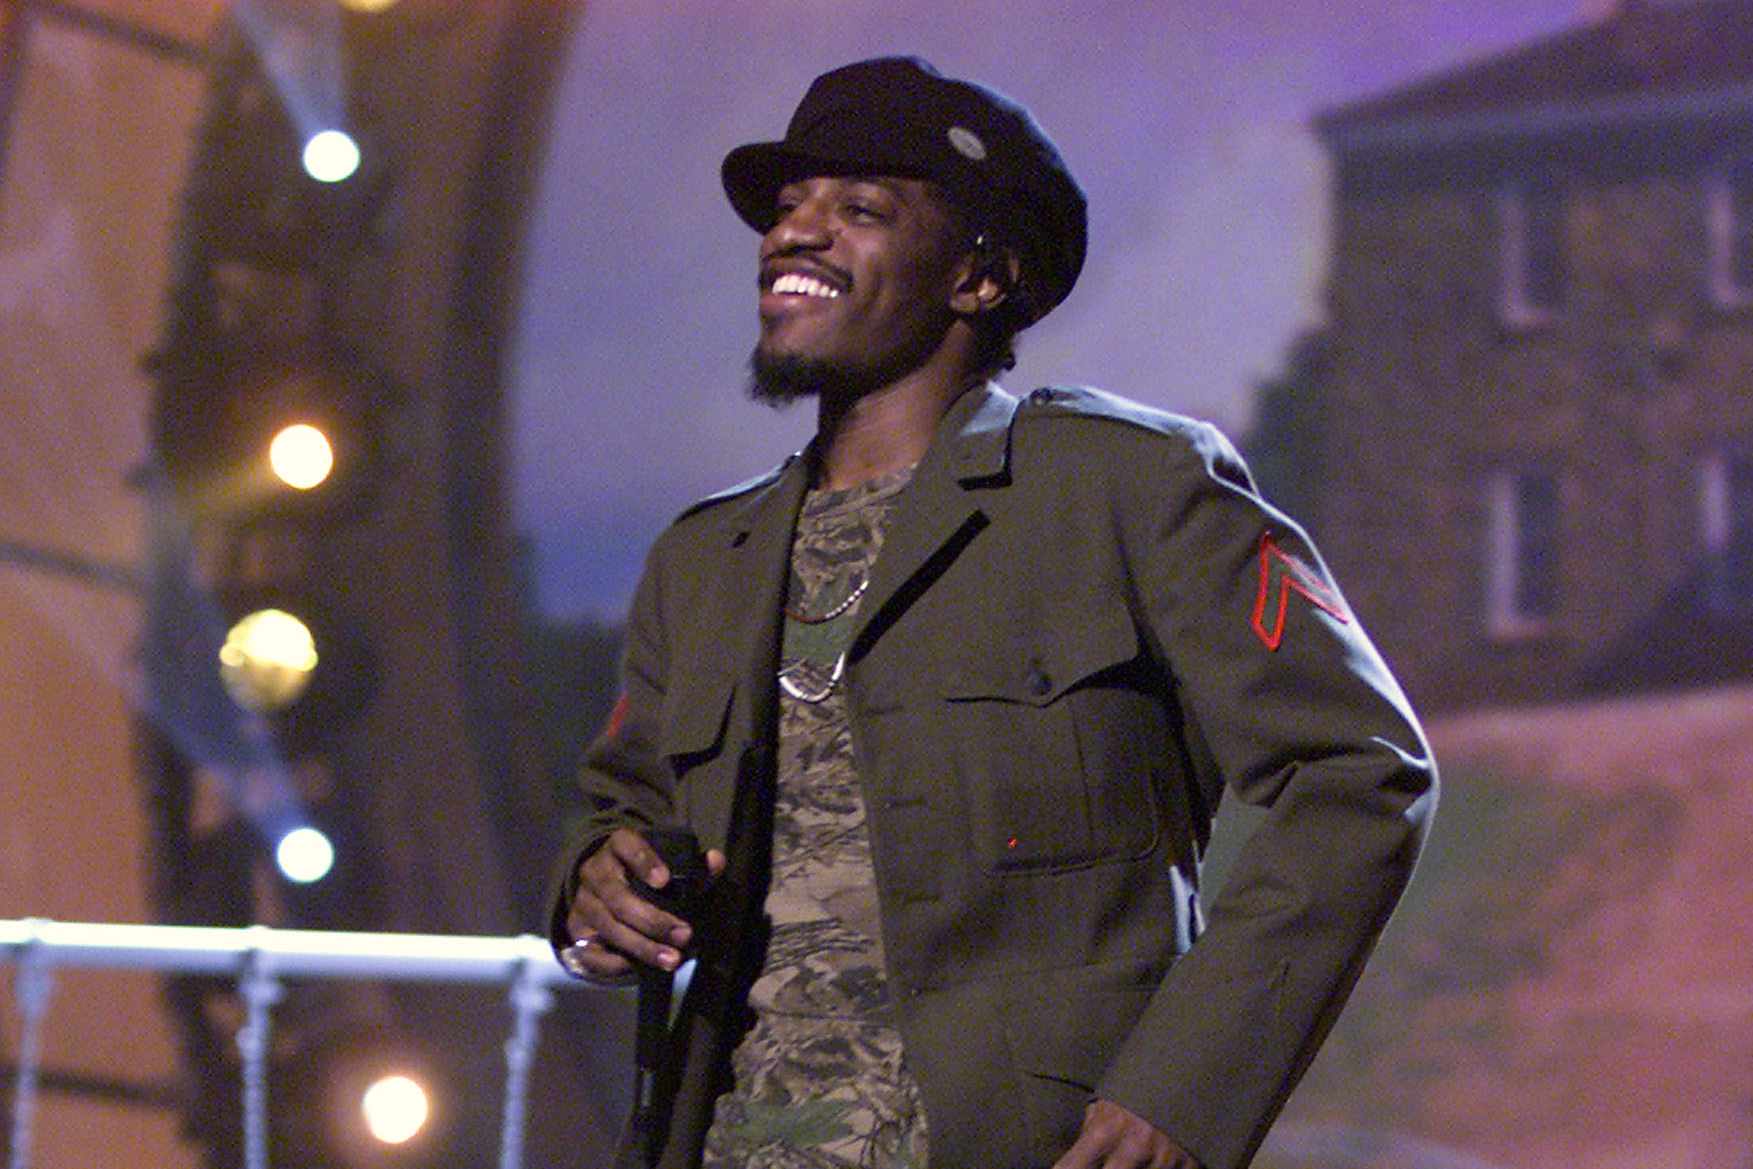 Andre 3000 performs at the Grammys